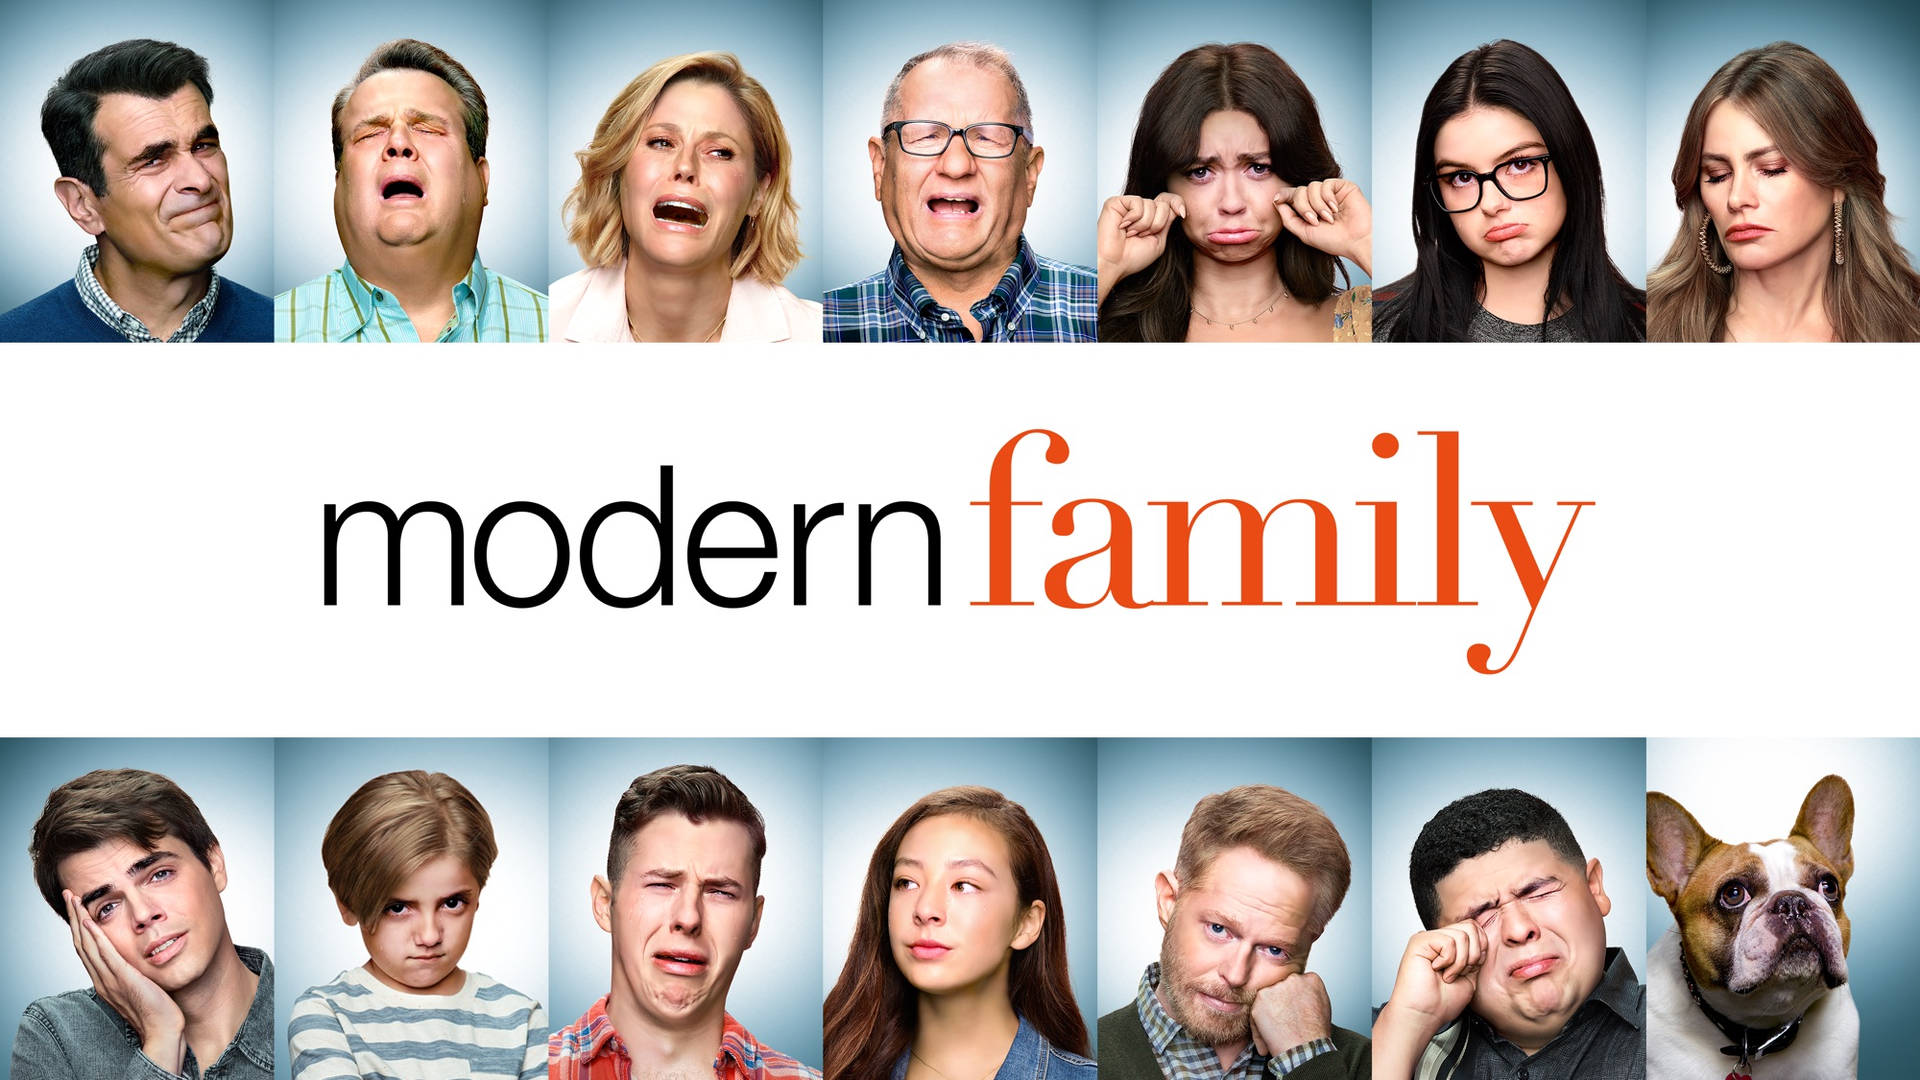 The Modern Family Cast On The Dvd Cover Of Their Hit Sitcom